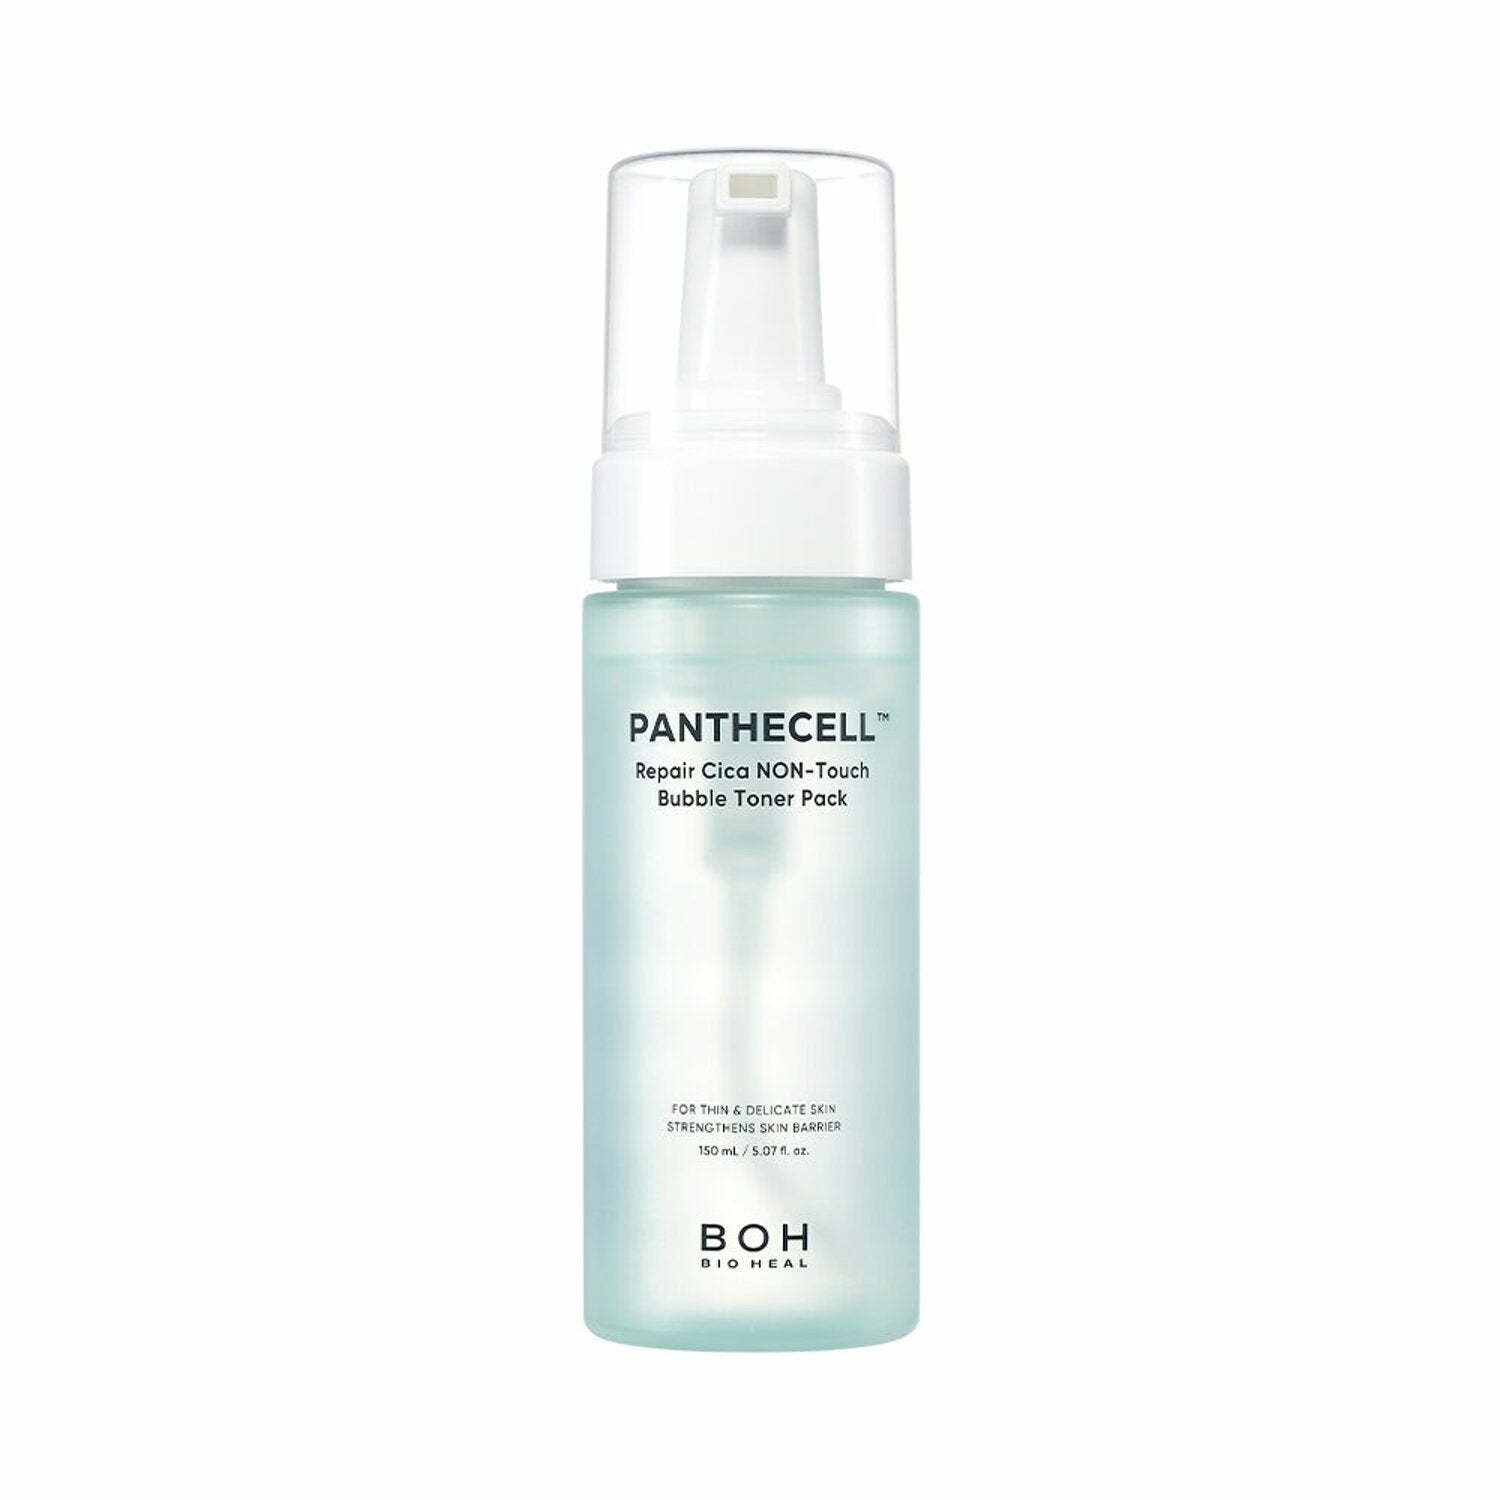 [BIO HEAL BOH] Panthecell Repair Cica Non-Touch Bubble Toner Pack 150ml